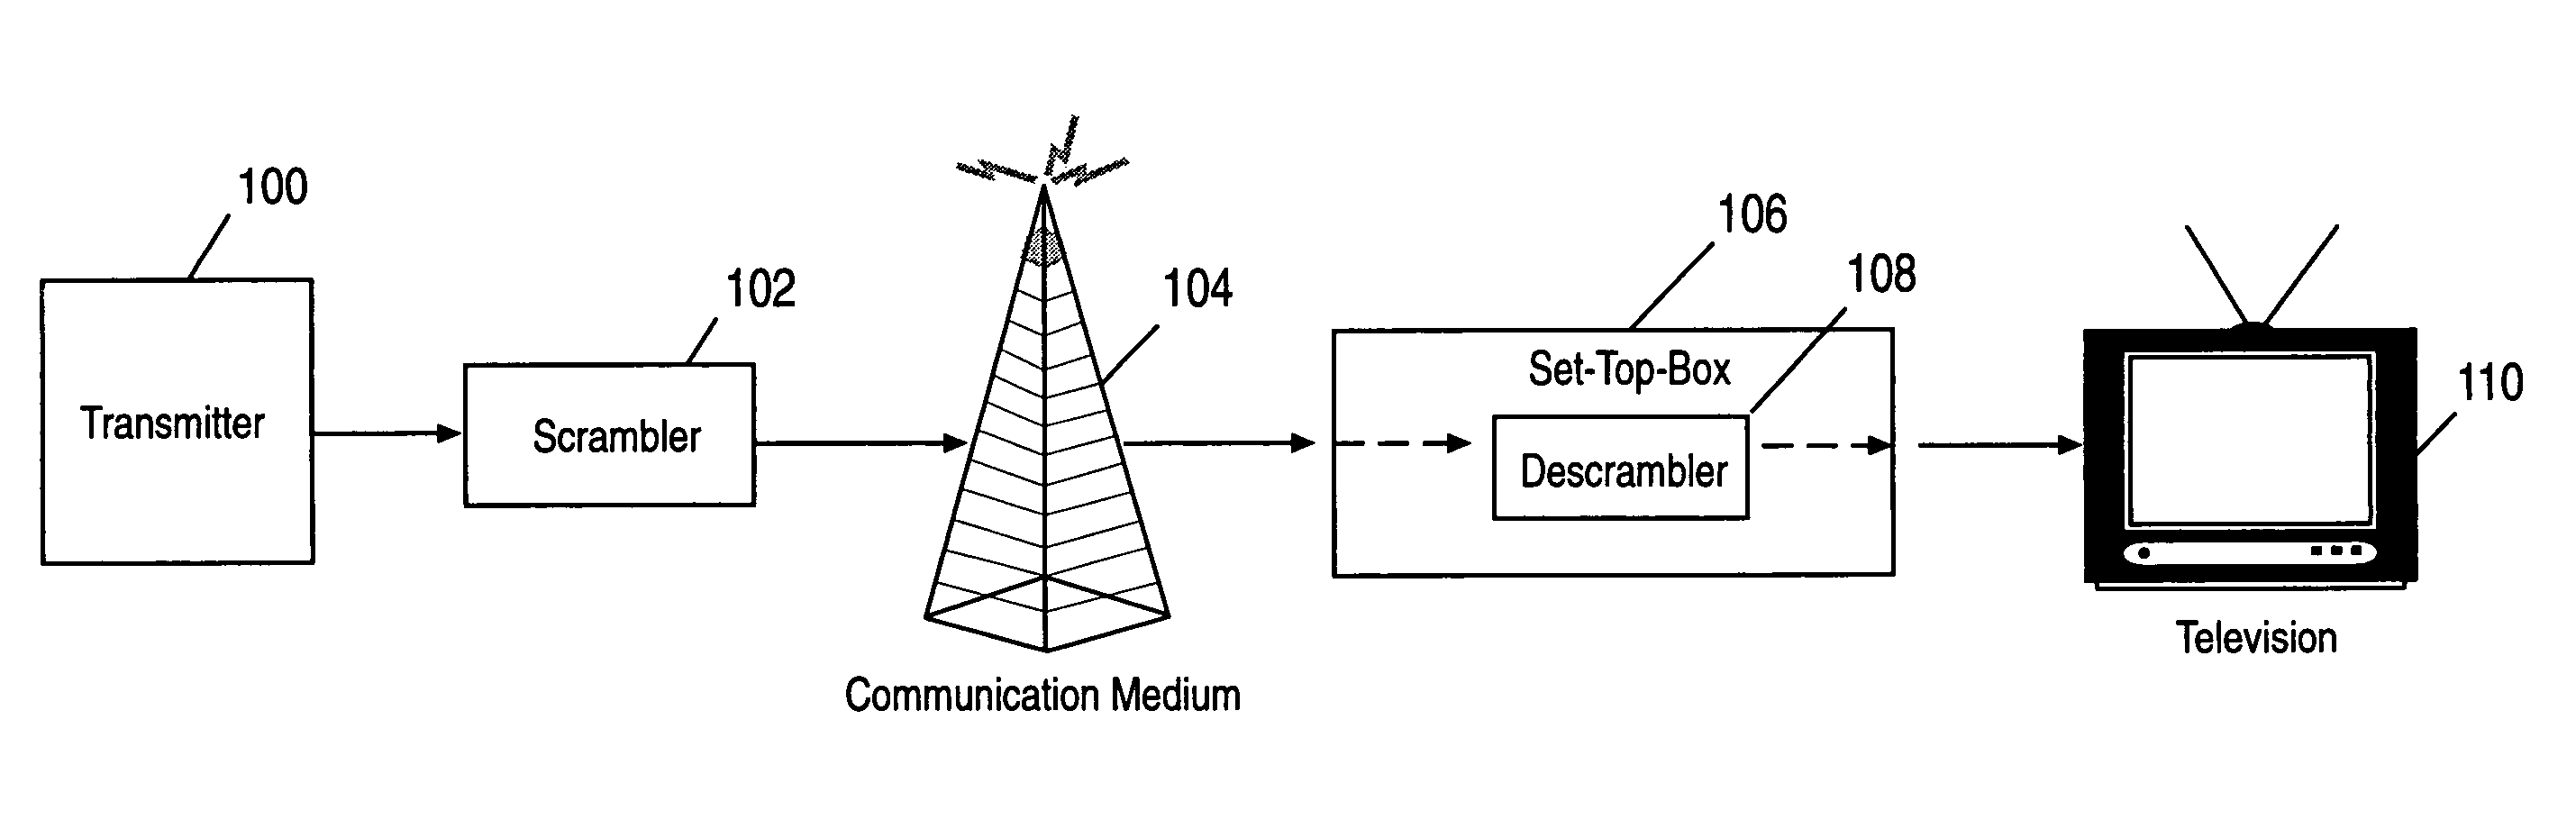 Controlling access to information over a multiband network